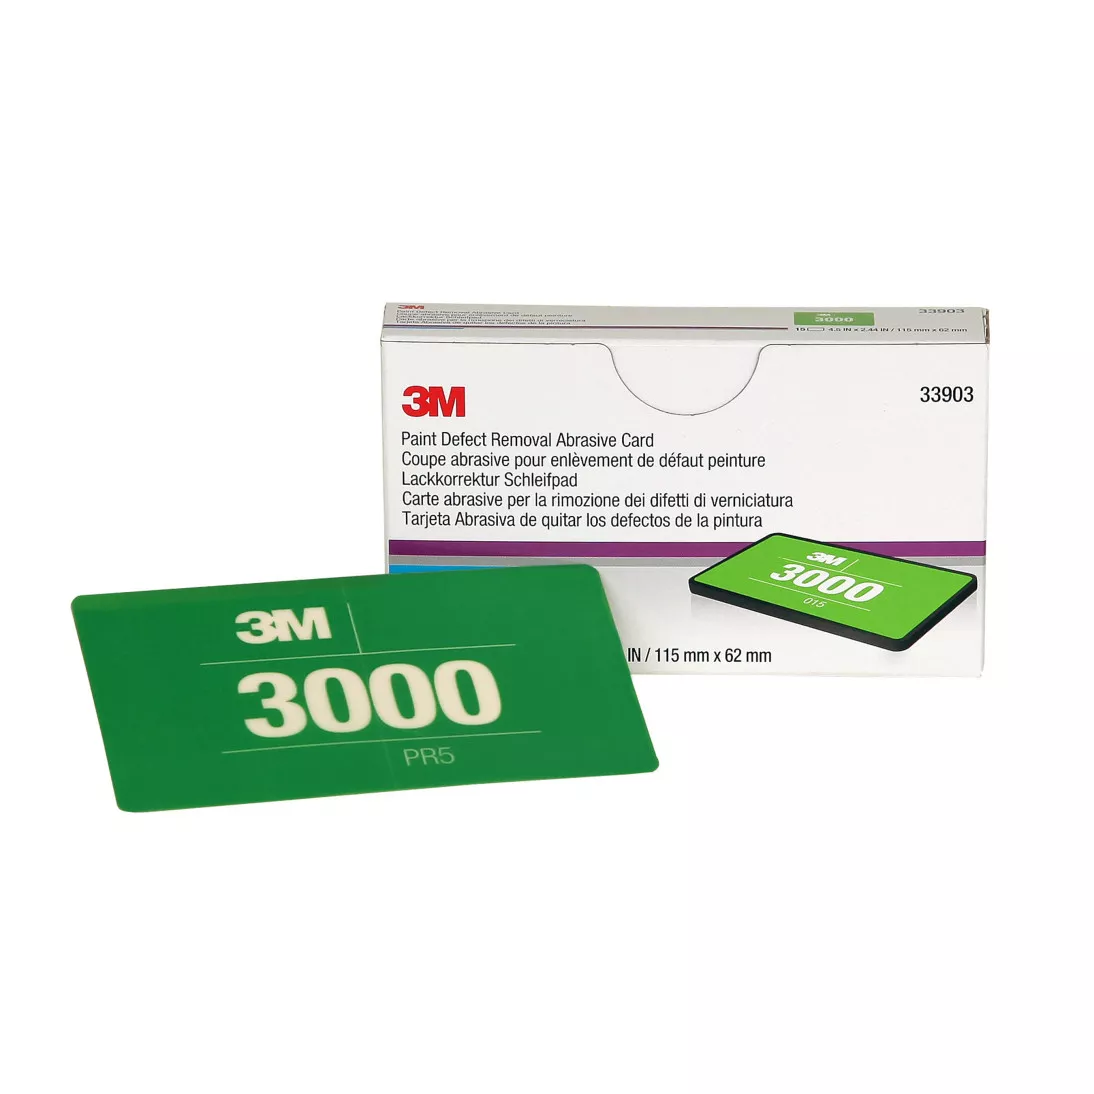 3M™ Paint Defect Removal Abrasive Card, 33903, 115 mm x 62 mm, 3000, 15
cards per pack, 10 packs per case